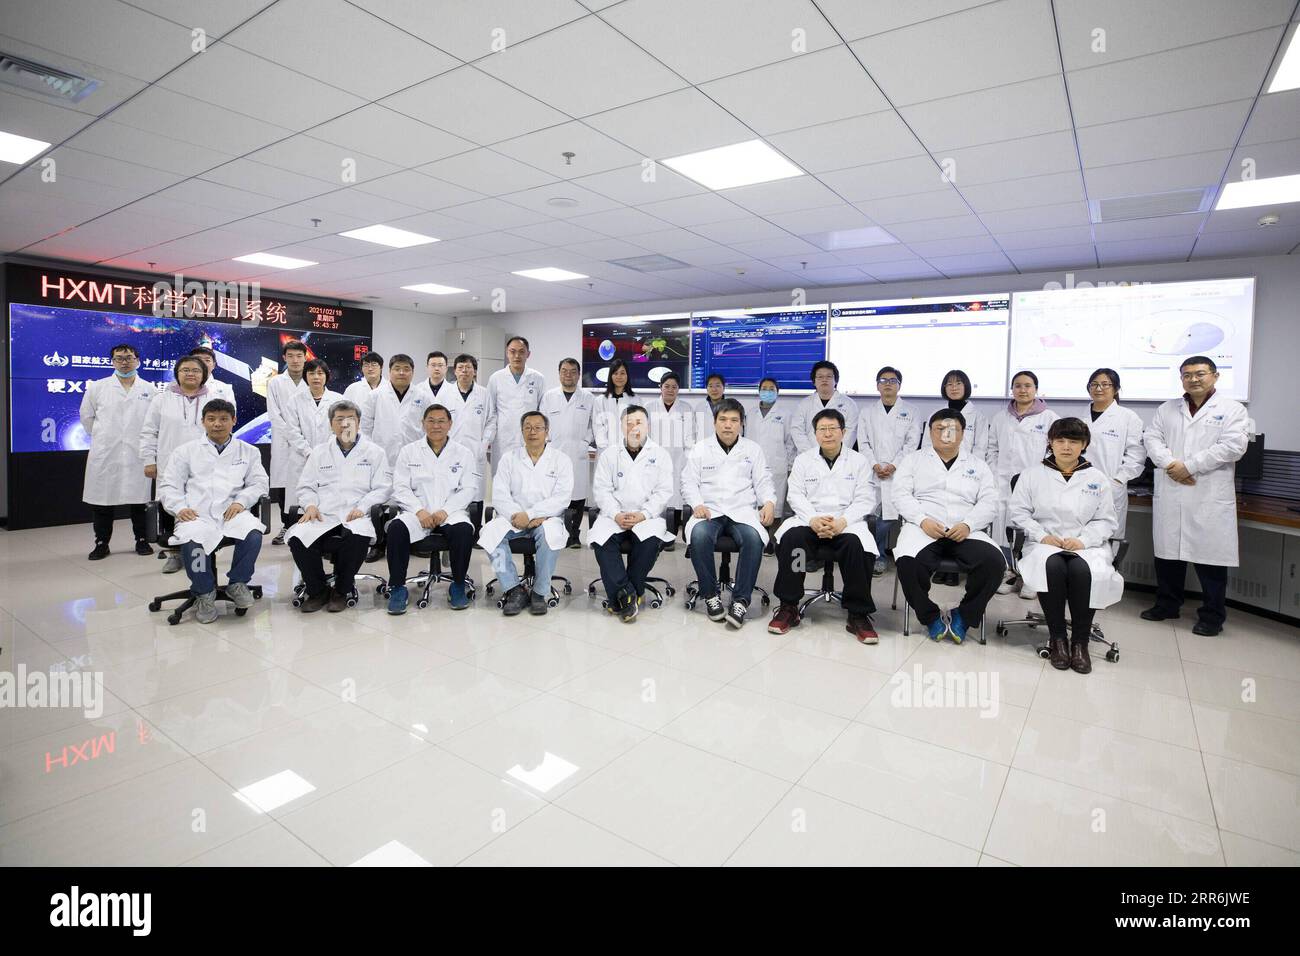 210219 -- BEIJING, Feb. 19, 2021 -- Members of the research team of China s Hard X-ray Modulation Telescope HXMT pose for a group photo at the Institute of High Energy Physics under the Chinese Academy of Sciences in Beijing, capital of China, Feb. 18, 2021. China s HXMT, the country s space science satellite also known as Insight, has found that a fast radio burst signal detected last year came from a magnetar in the Milky Way, Chinese scientists announced Friday. The discovery marked a milestone in understanding the nature of the mysterious signal emanating from the universe, the scientists Stock Photo